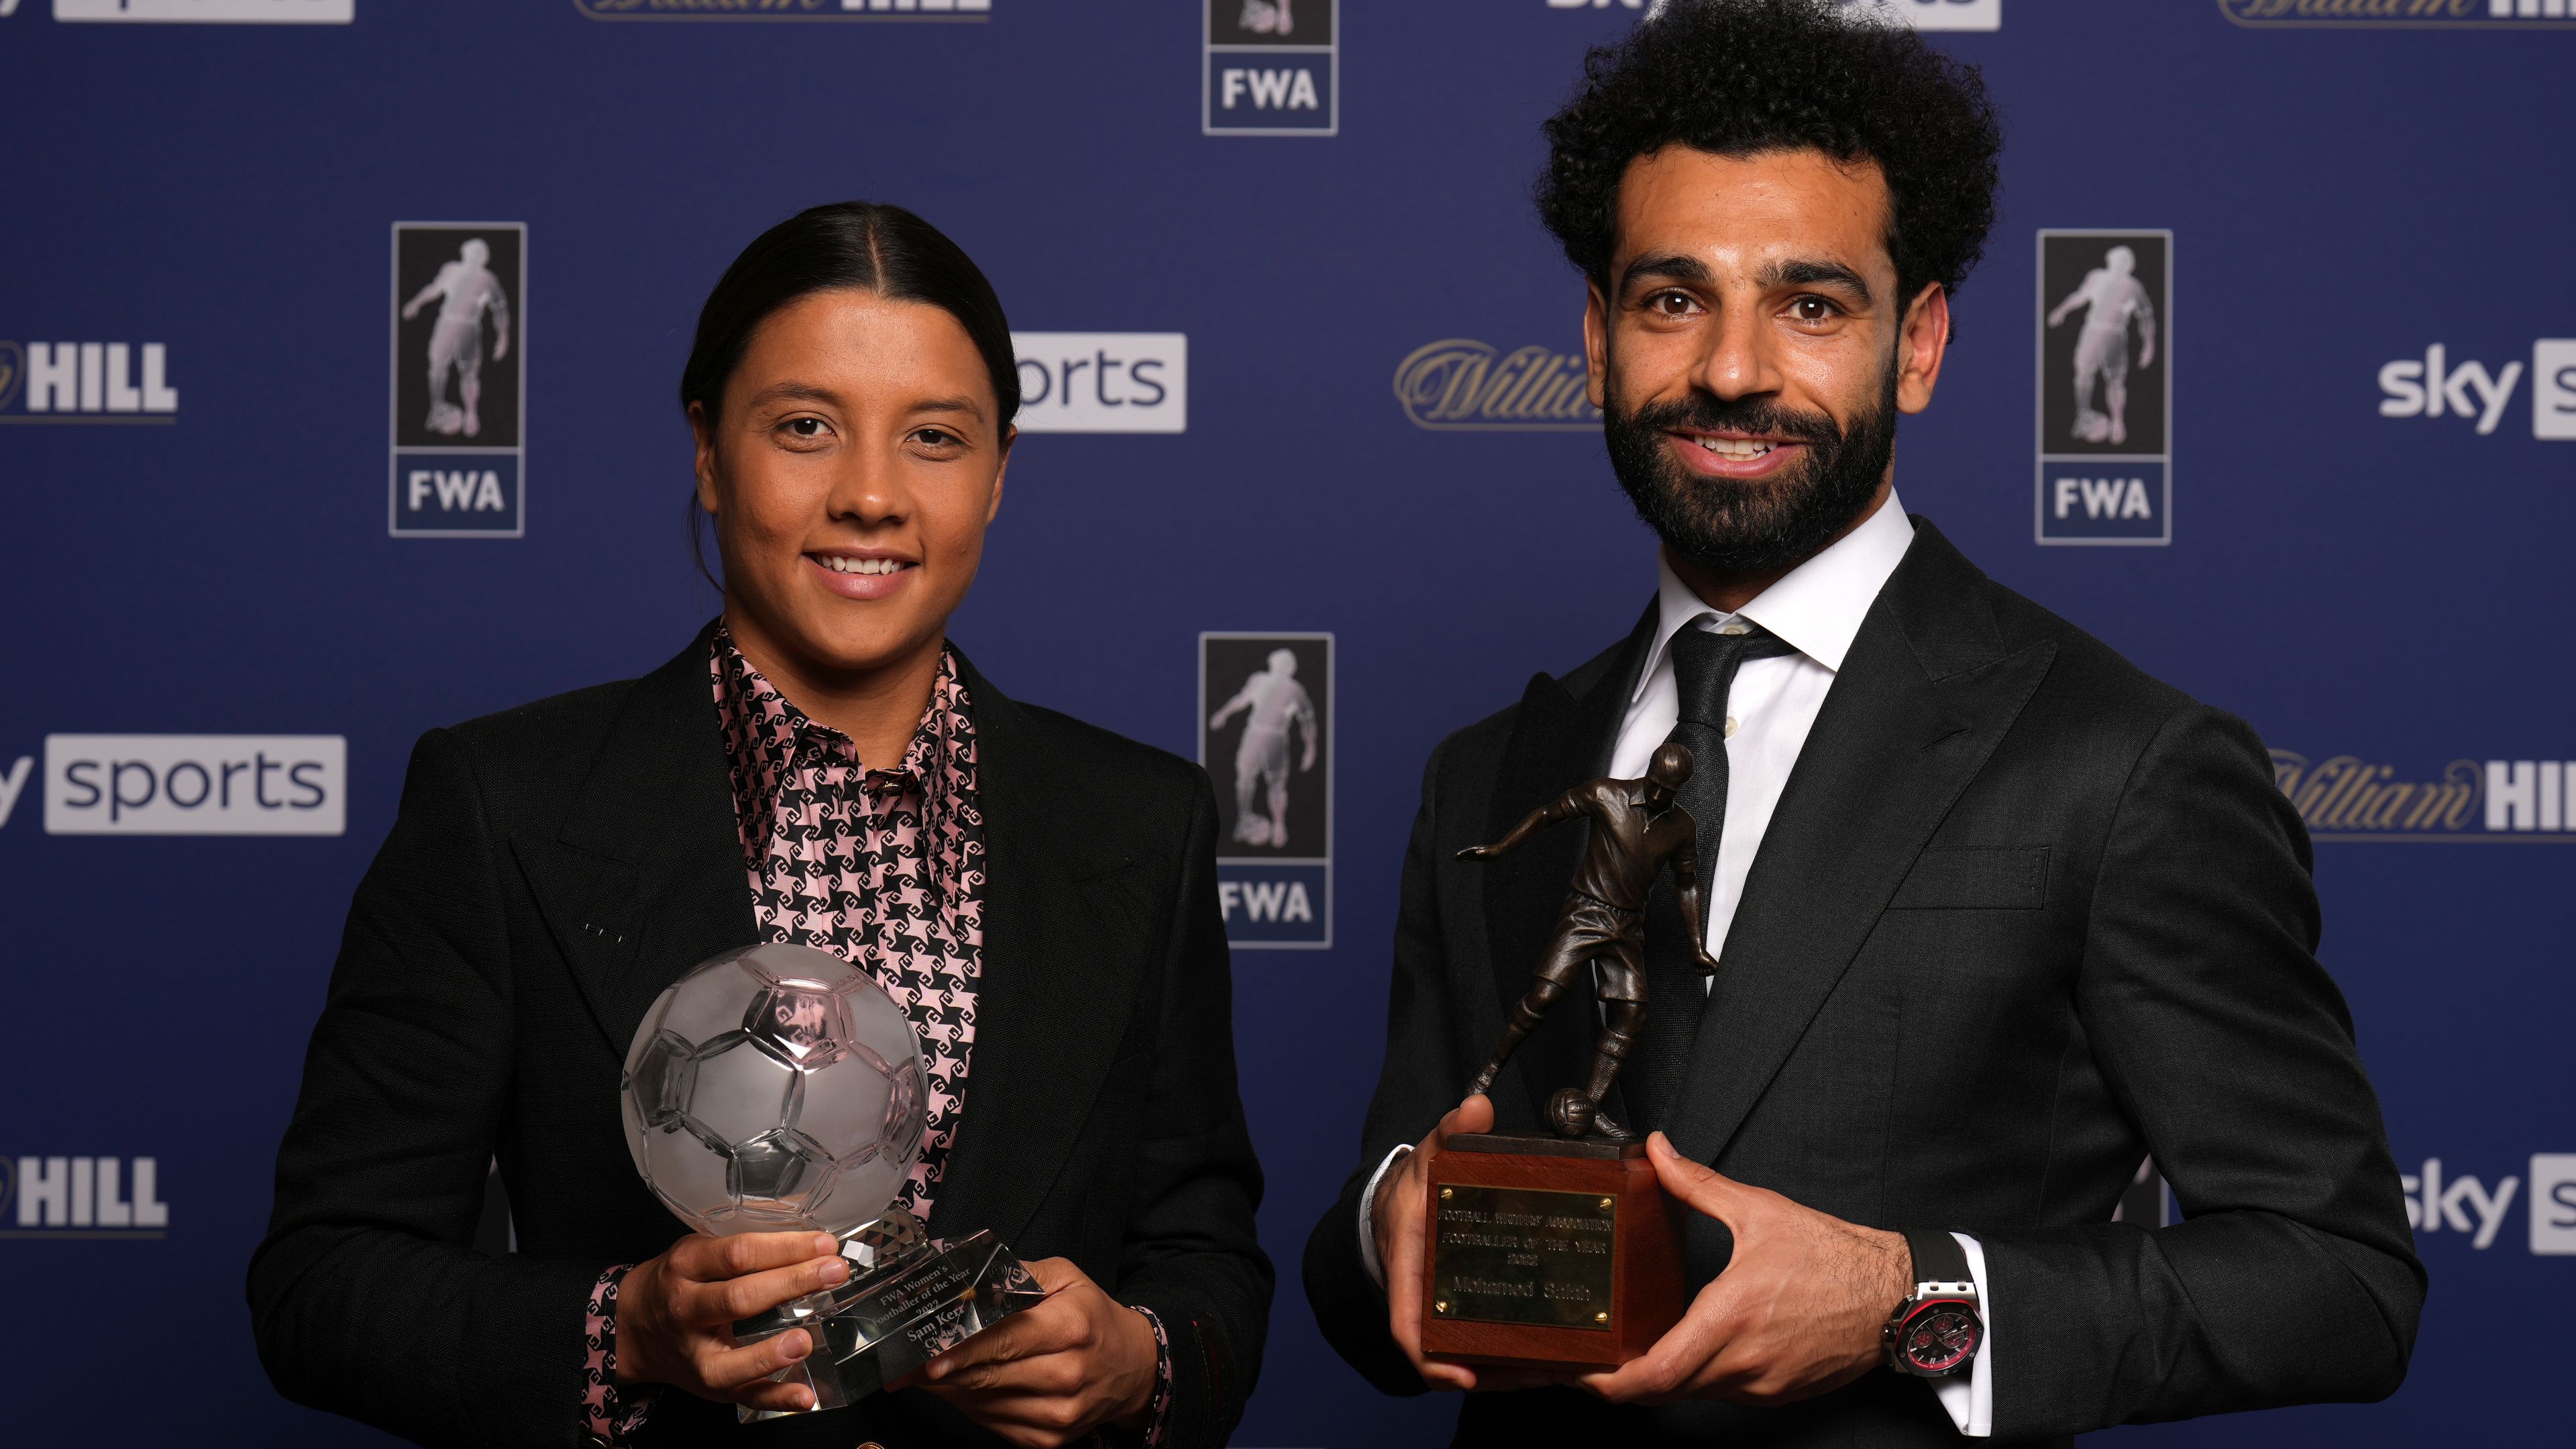 Chelsea&#x27;s Sam Kerr and Liverpool&#x27;s Mohamed Salah pose with their FWA Player of the Year Awards.